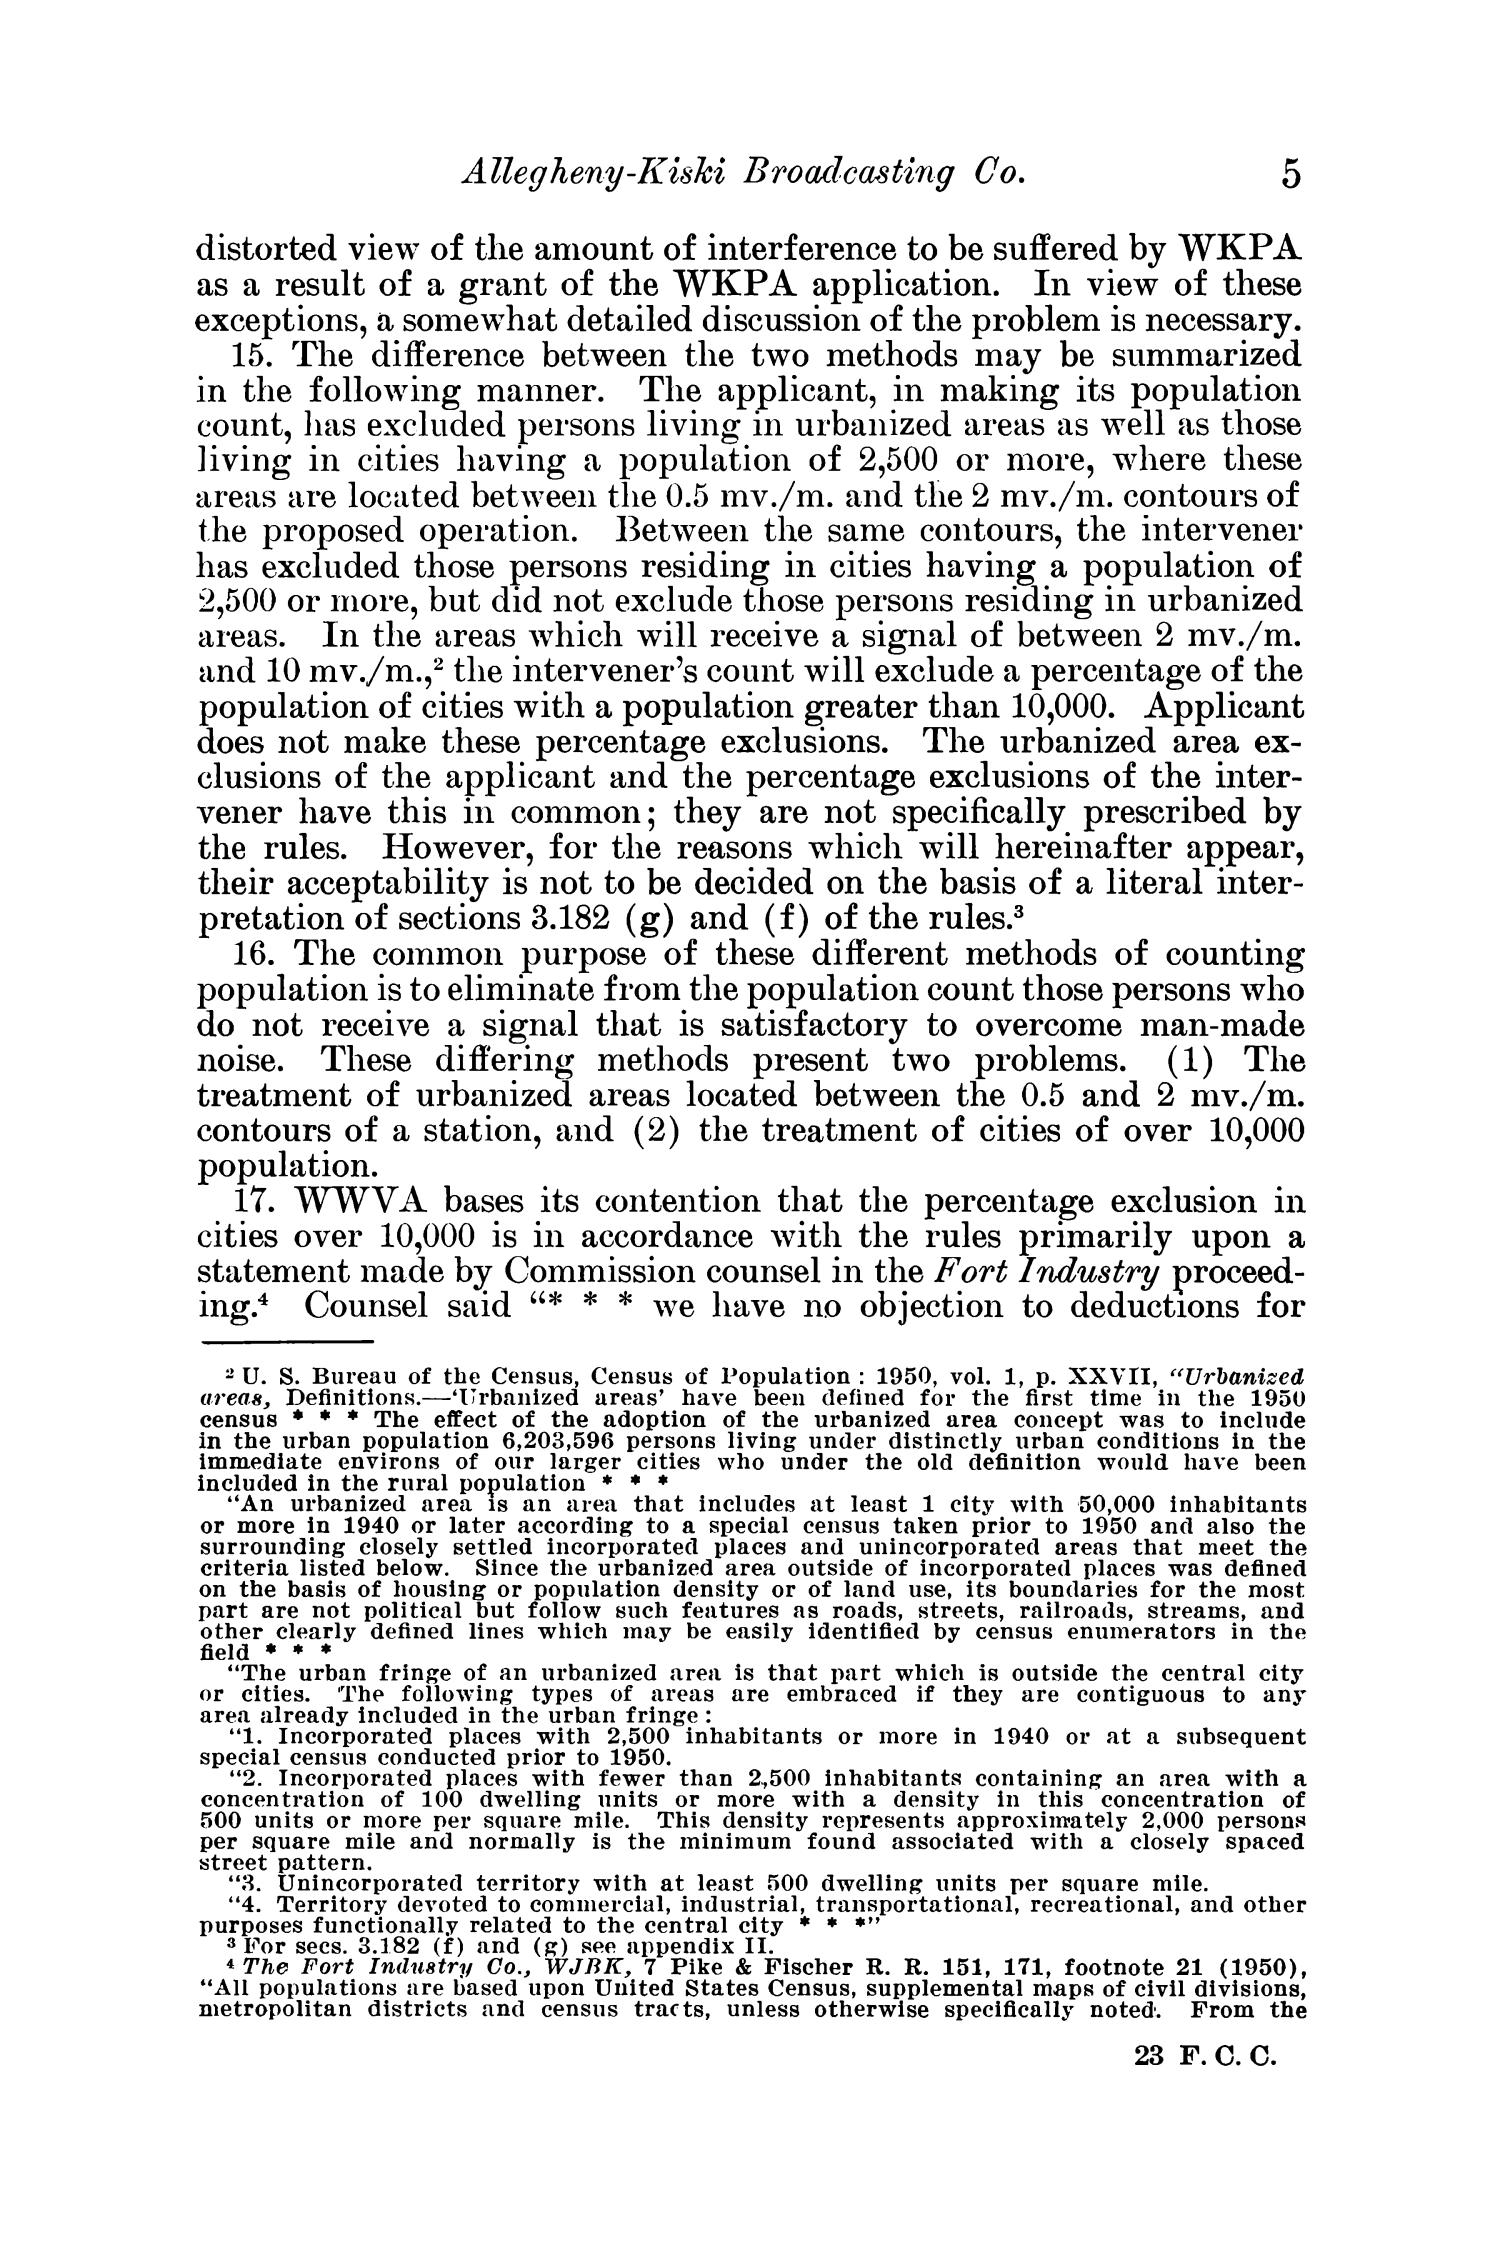 FCC Reports, Volume 23, July 12, 1957 to December 27, 1957
                                                
                                                    5
                                                